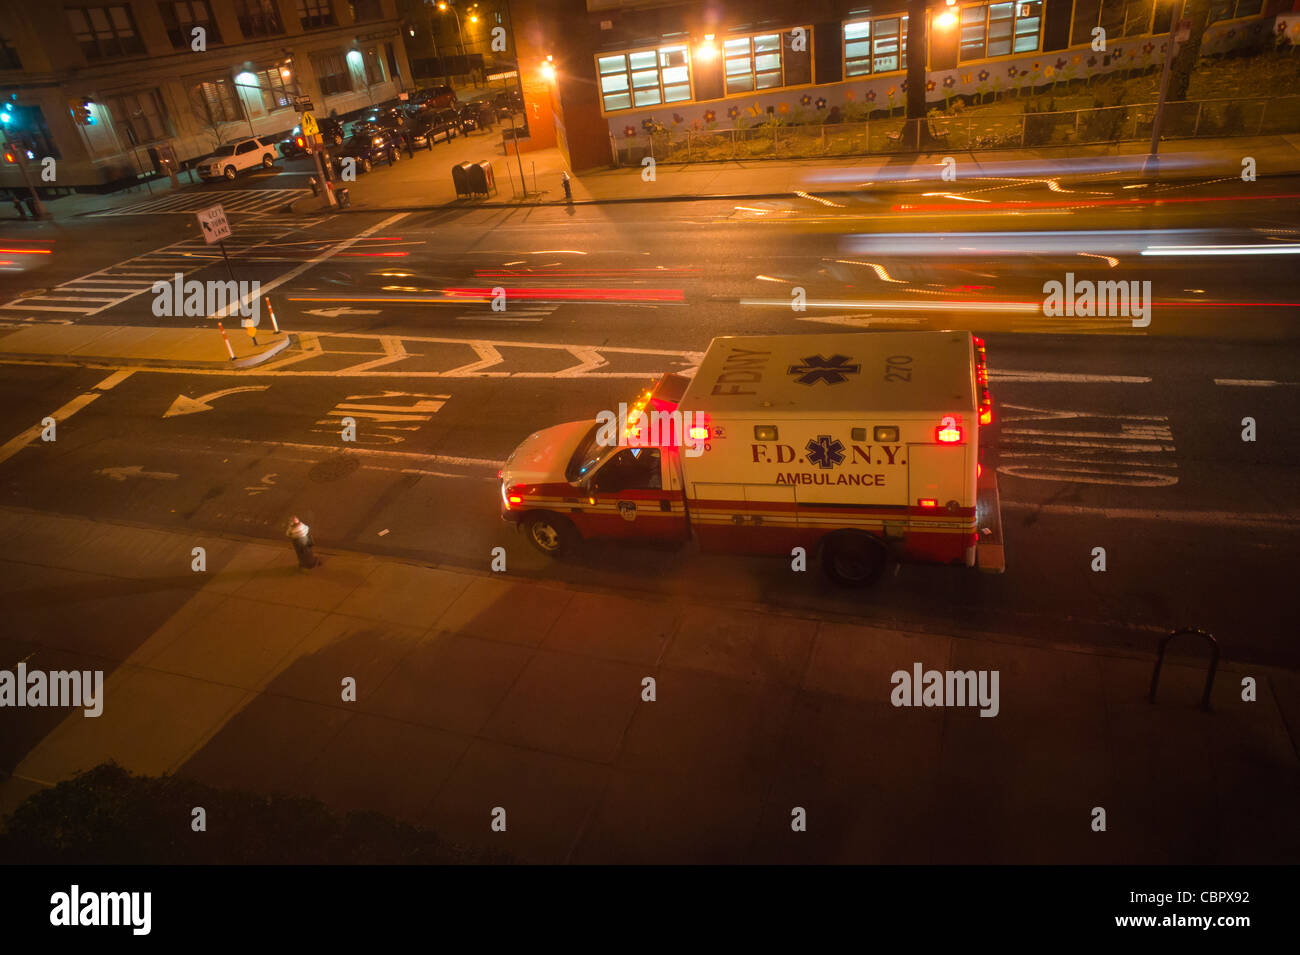 An FDNY ambulance is parked outside an apartment building Stock Photo